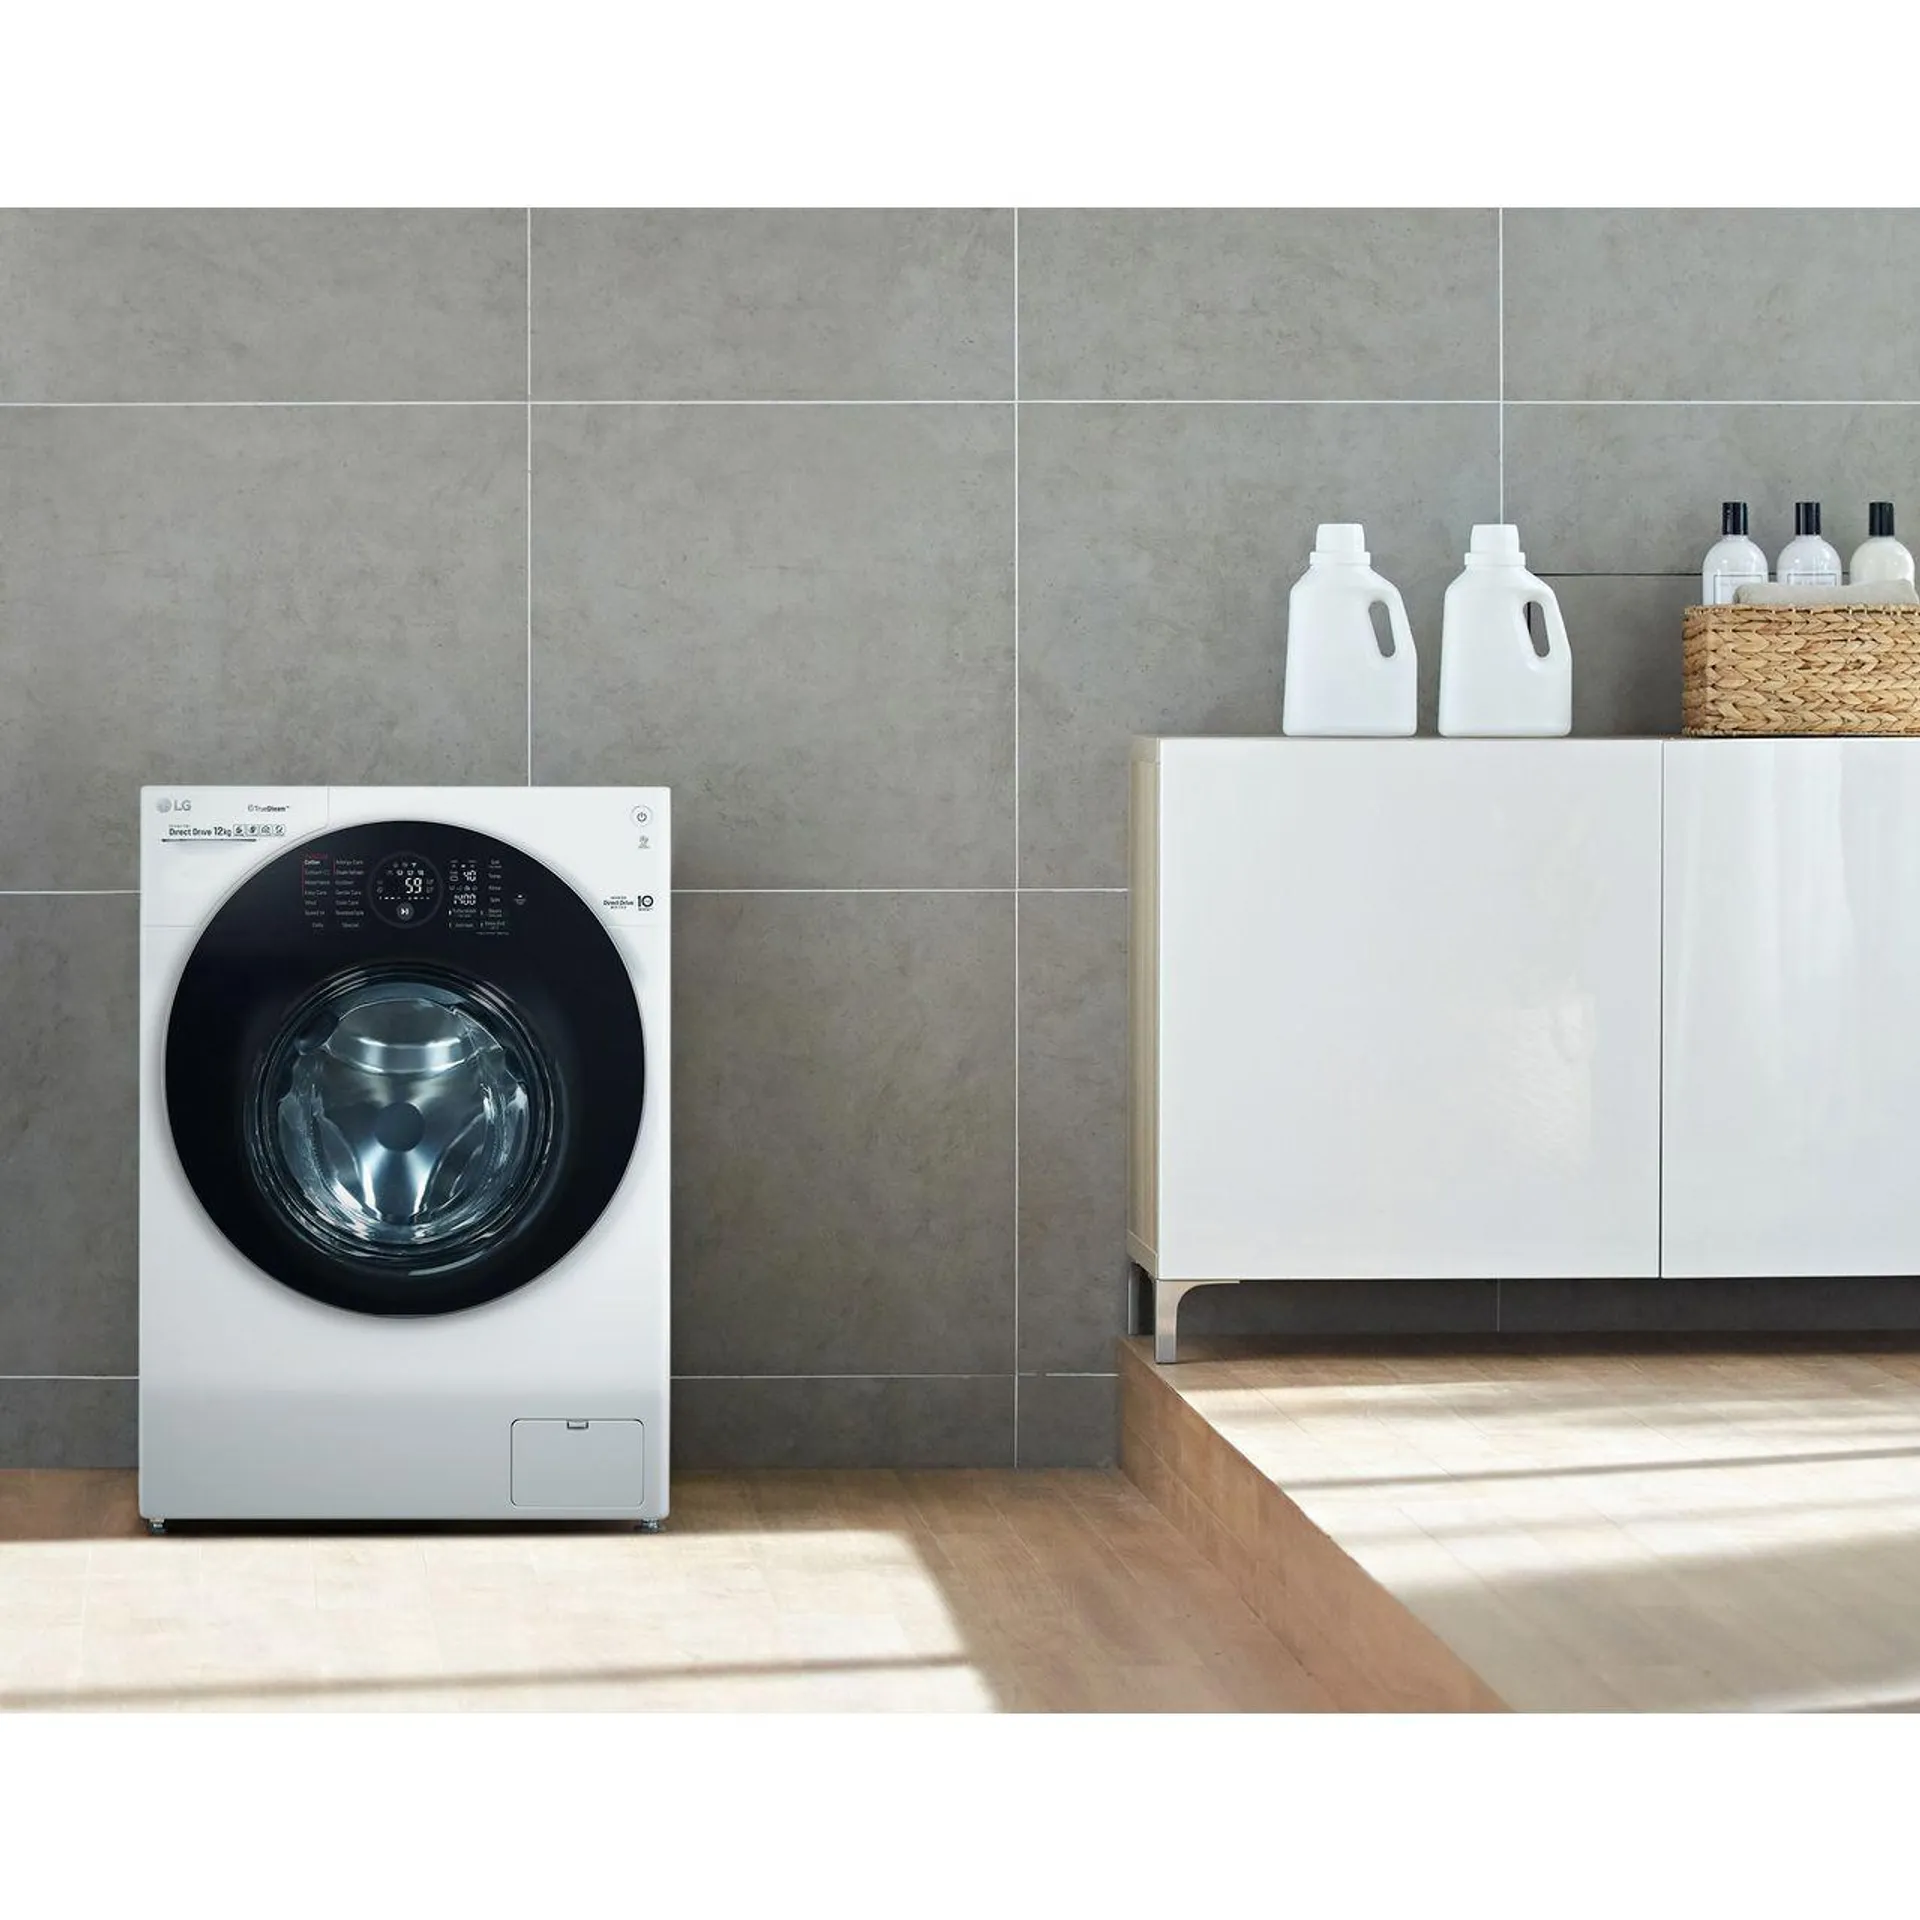 LG TrueSteam™ FH4G1BCS2 12kg Washing Machine with 1400 rpm - White - A Rated